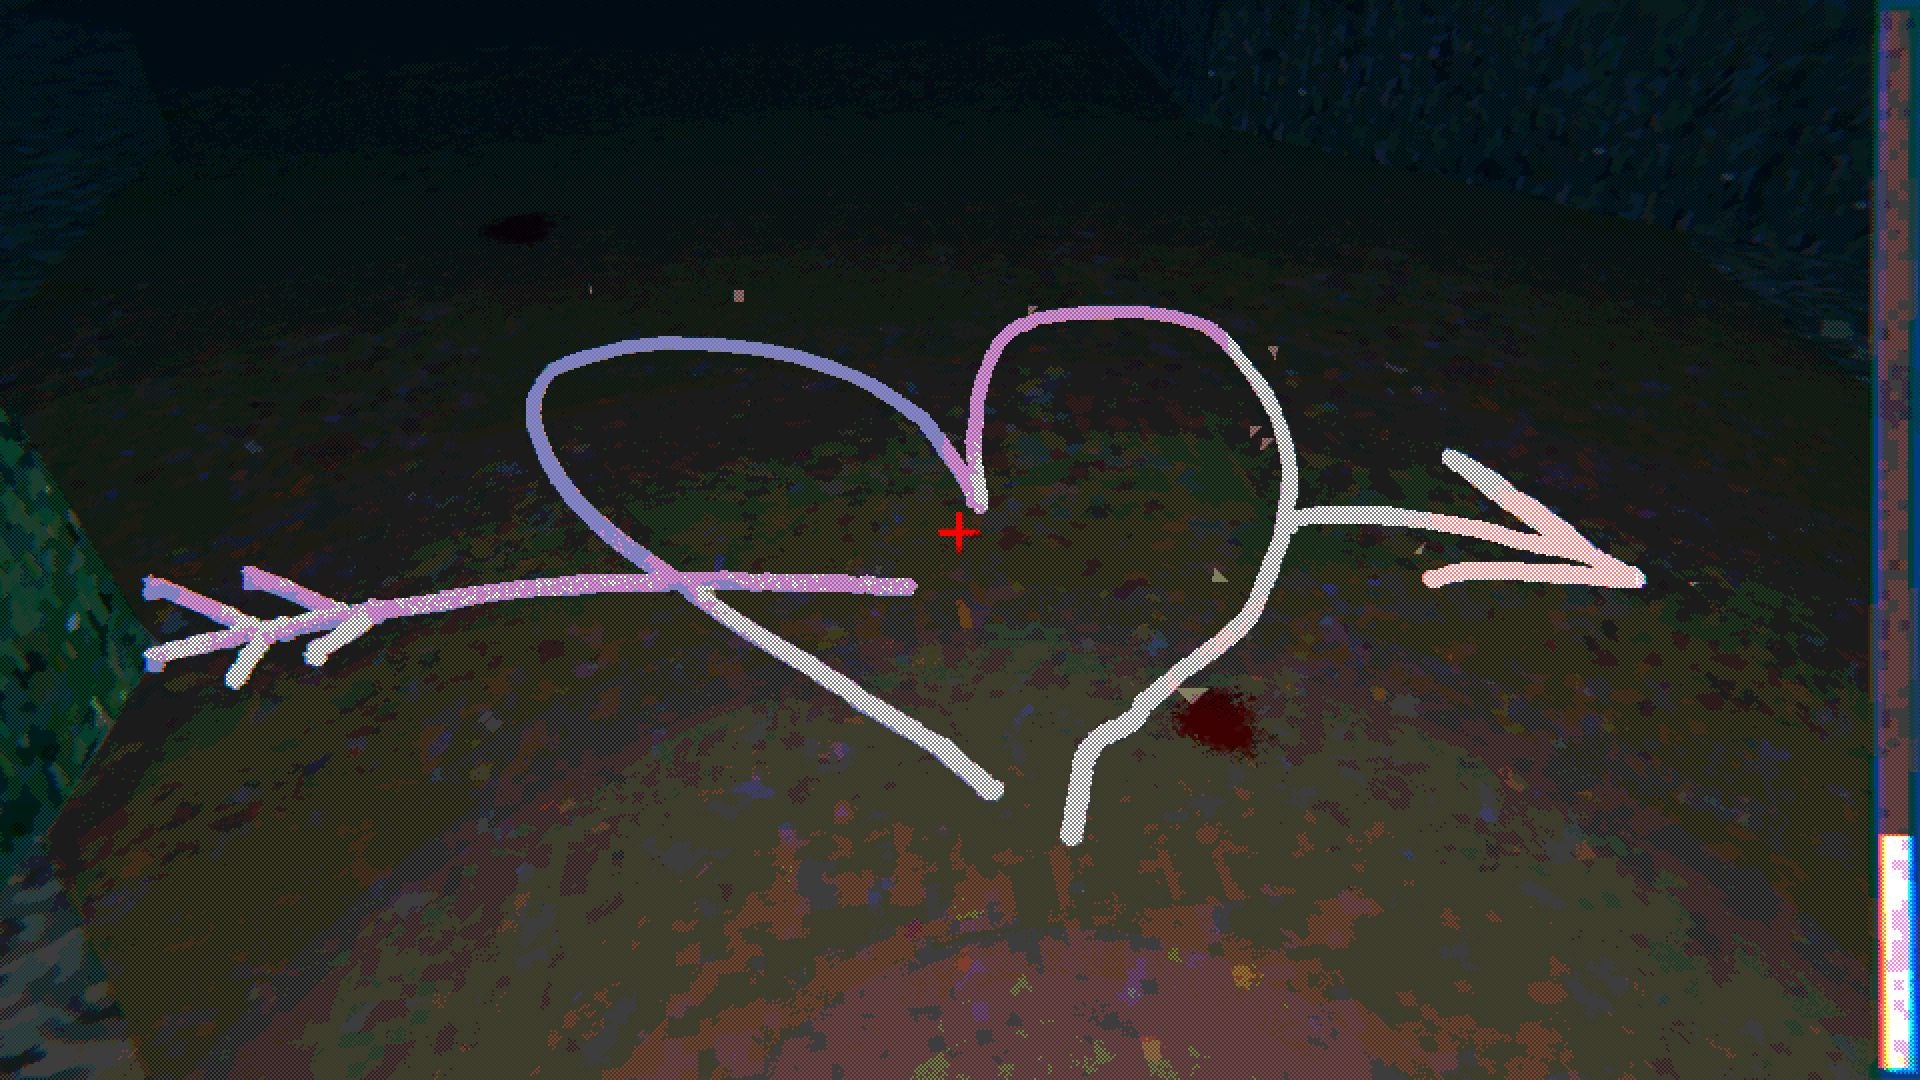 A love heart with an arrow through it drawn on the ground in magical salt in The Salt Order